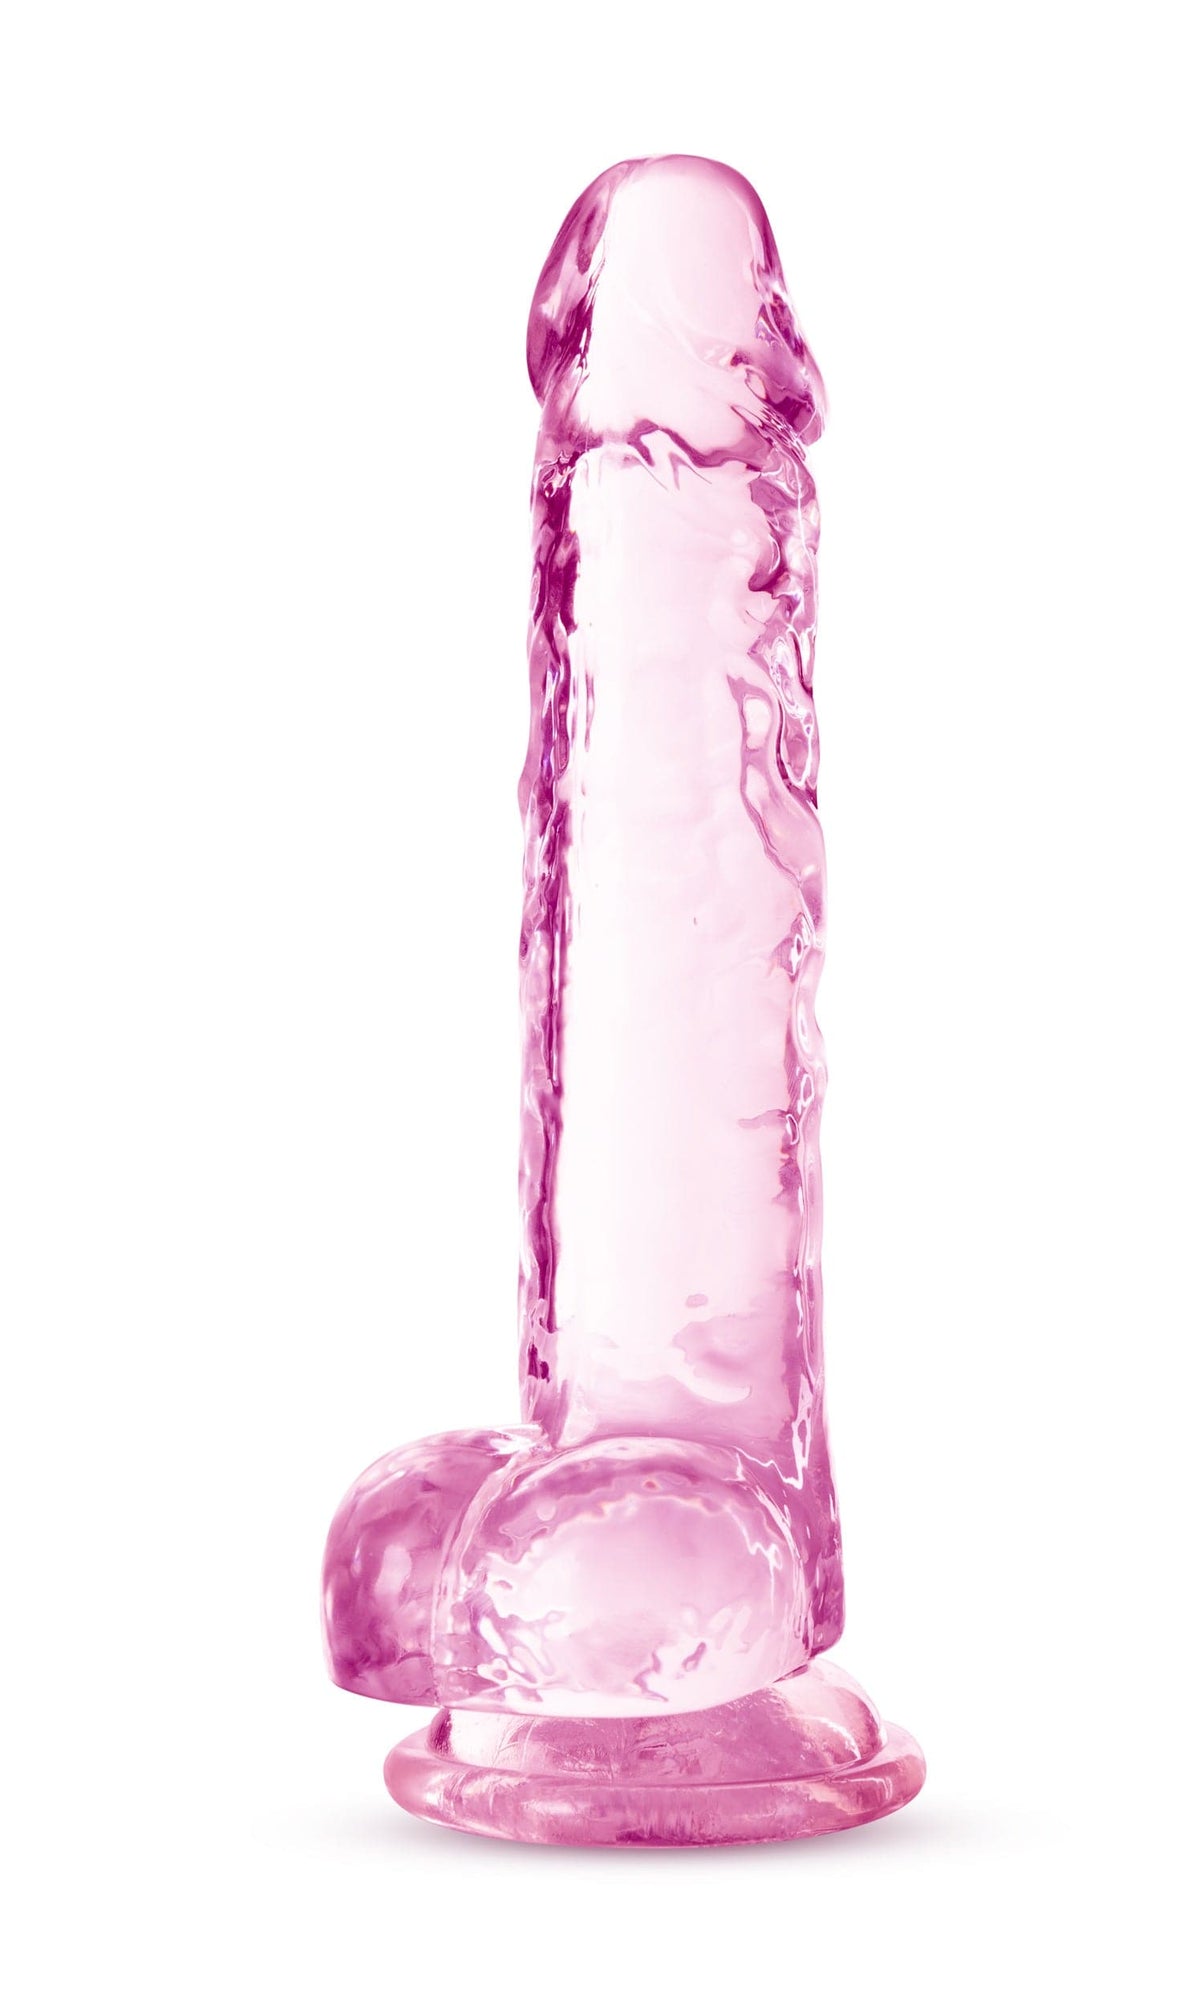 naturally yours 7 inch crystalline dildo rose